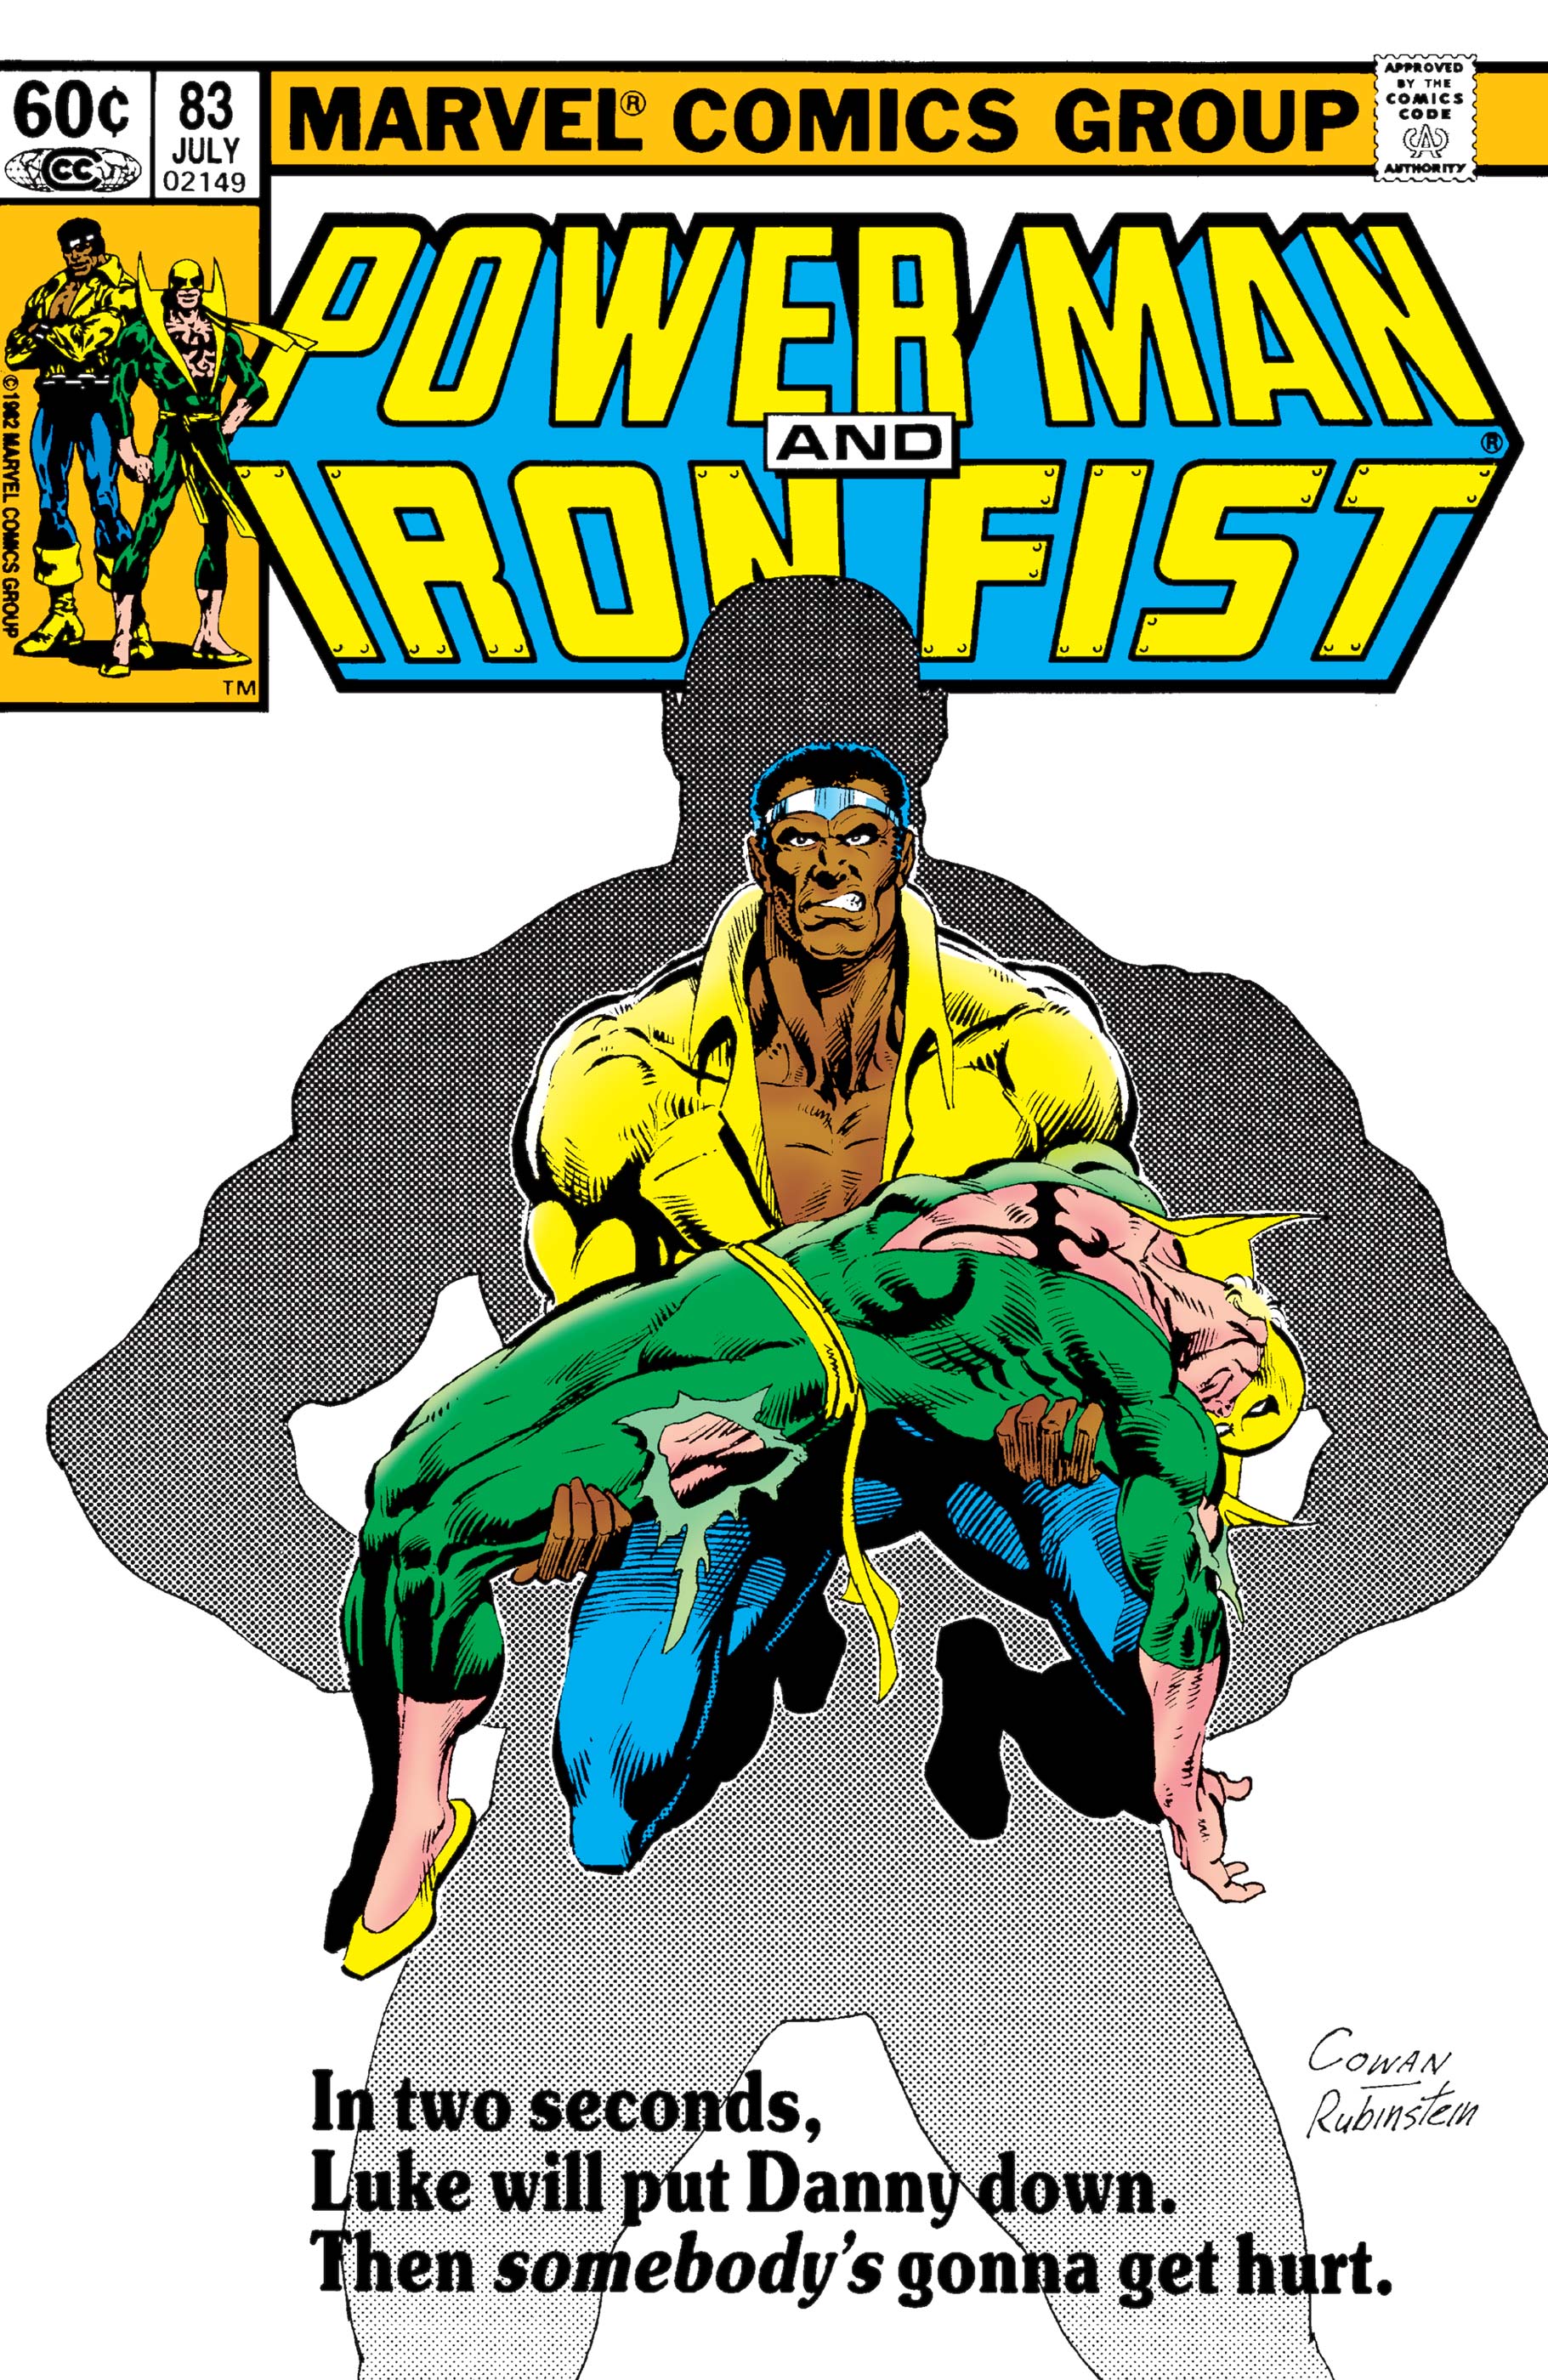 Power Man and Iron Fist (1978) #83